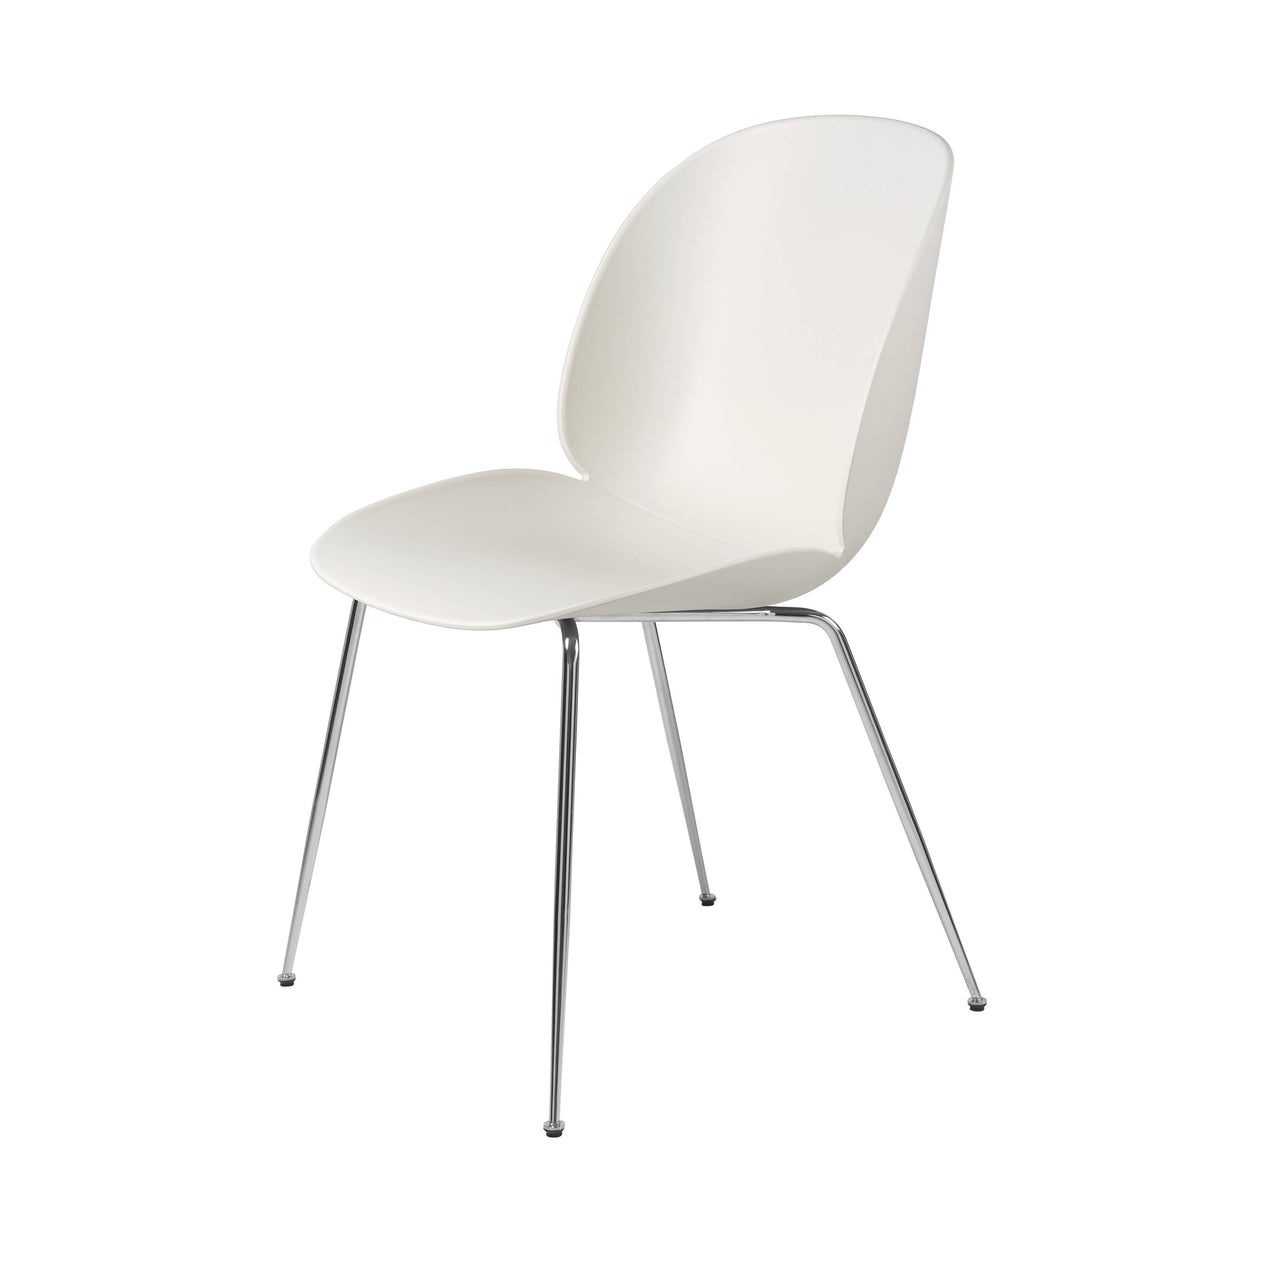 Beetle Dining Chair: Conic Base + Alabaster White + Chrome + Felt Glides